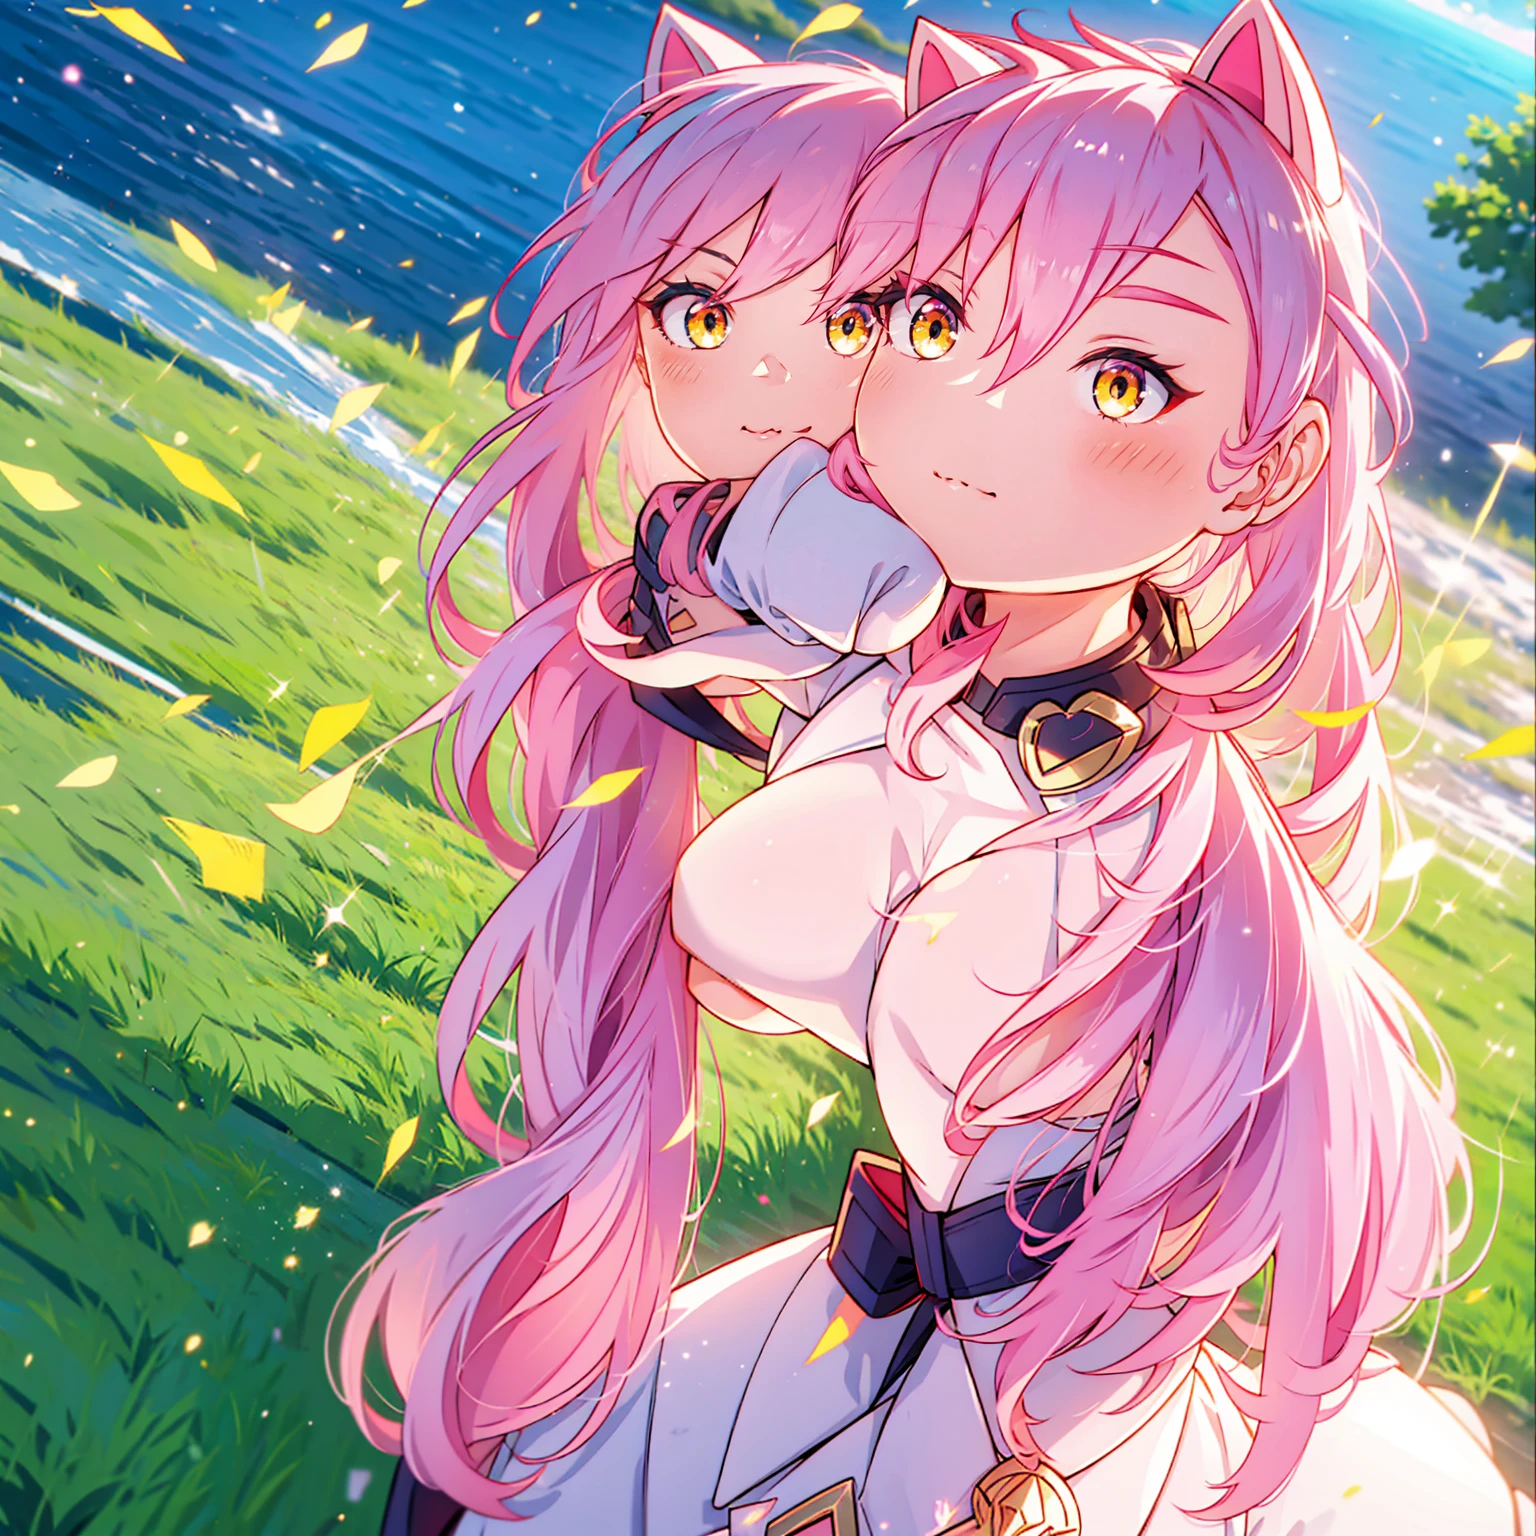 An anime girl with cat ears. Fake cat ears, and the cat ears are framed in gold on the head, long pink hair, very long hair, bright pink hair, white miniskirt with gold belt, She wears white gloves on her hands, pinker BH pinker Tanger, around the neck a golden collar, View to the viewer, 
sexly, large , tight juicy ass, elongated yellow eyes with pink fragments, cute face",,